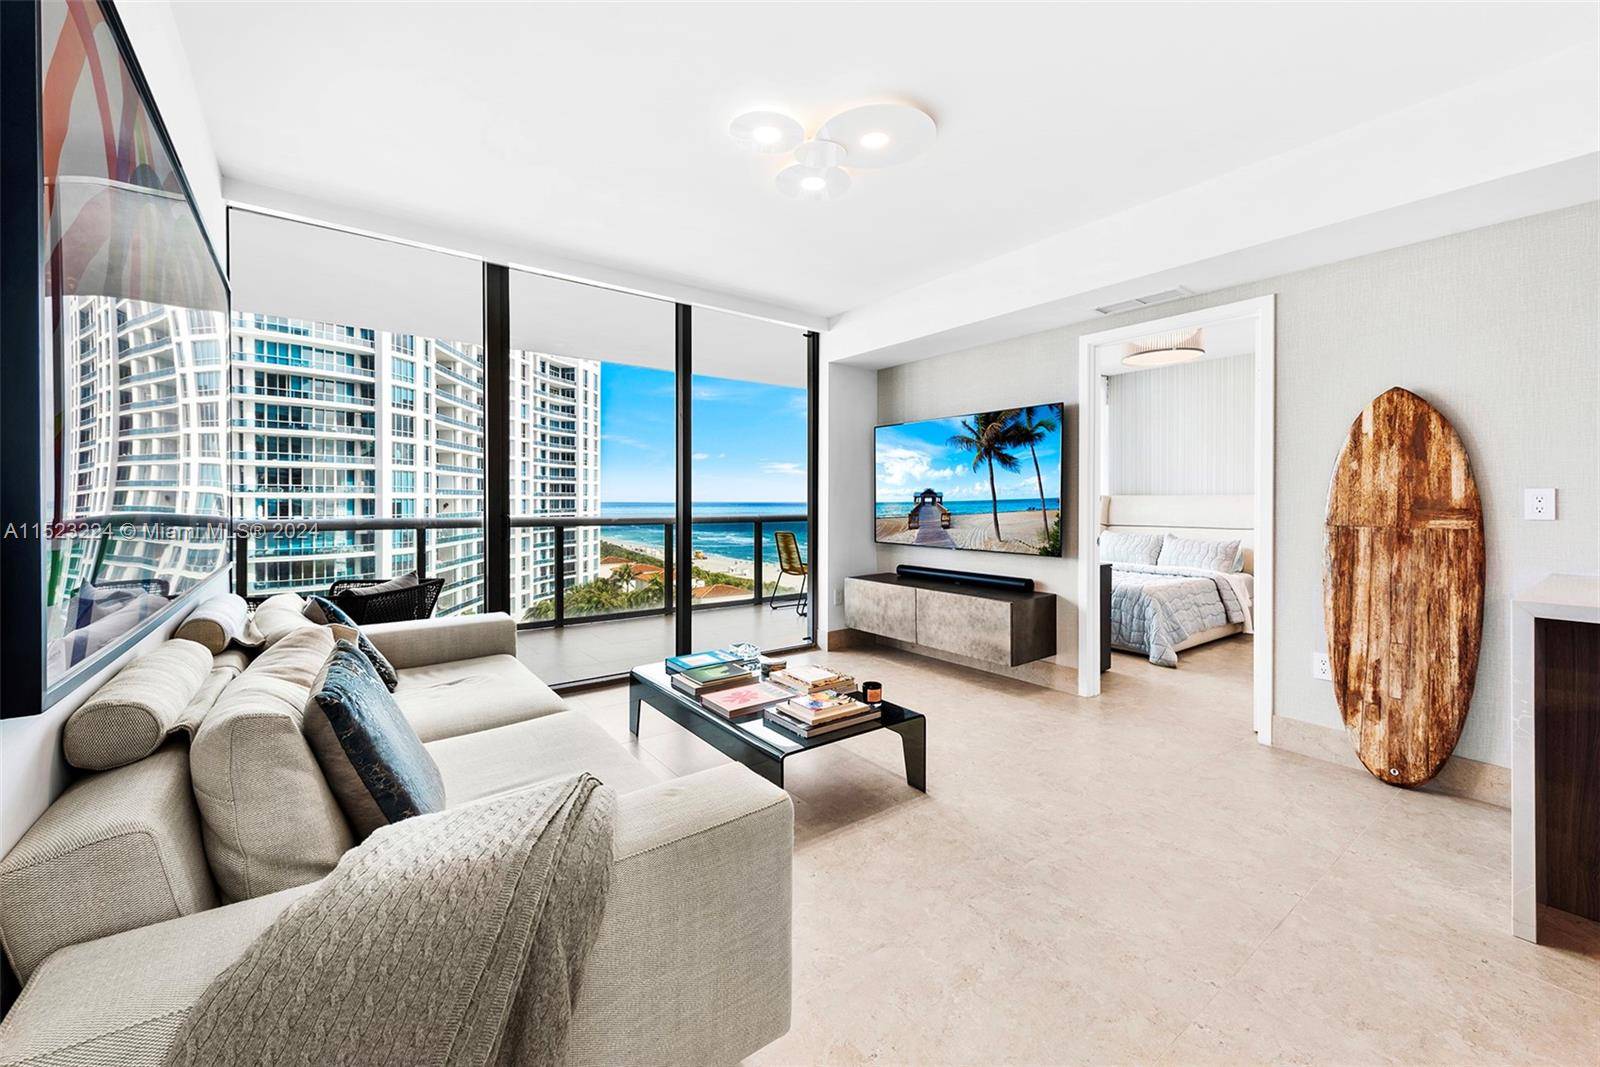 Indulge in coastal luxury with this 2BR, 2.